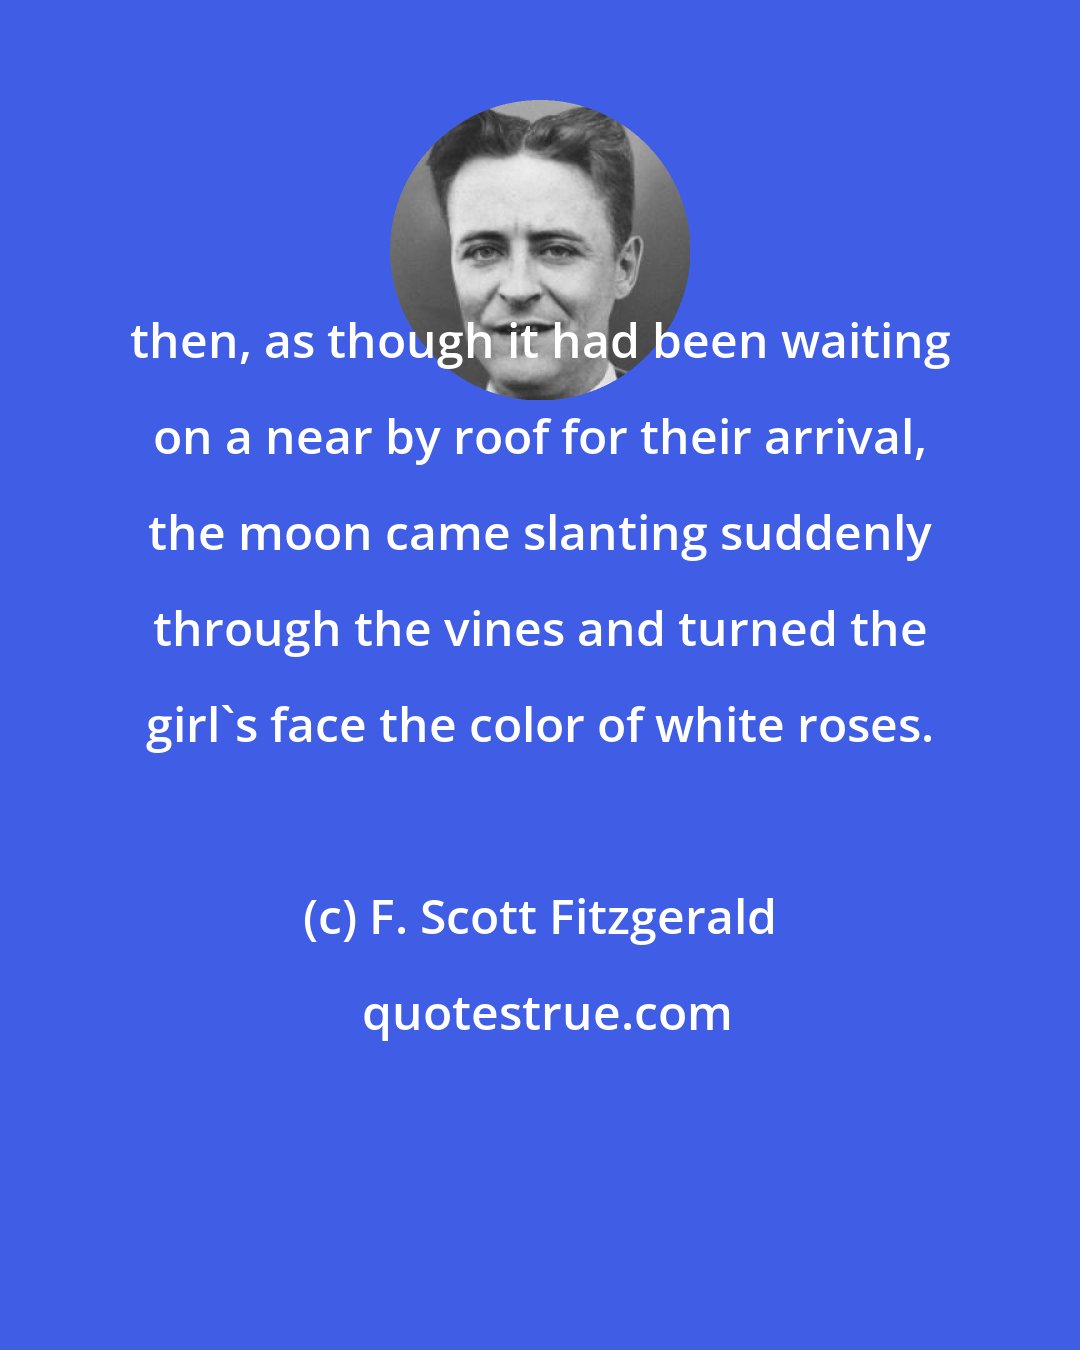 F. Scott Fitzgerald: then, as though it had been waiting on a near by roof for their arrival, the moon came slanting suddenly through the vines and turned the girl's face the color of white roses.